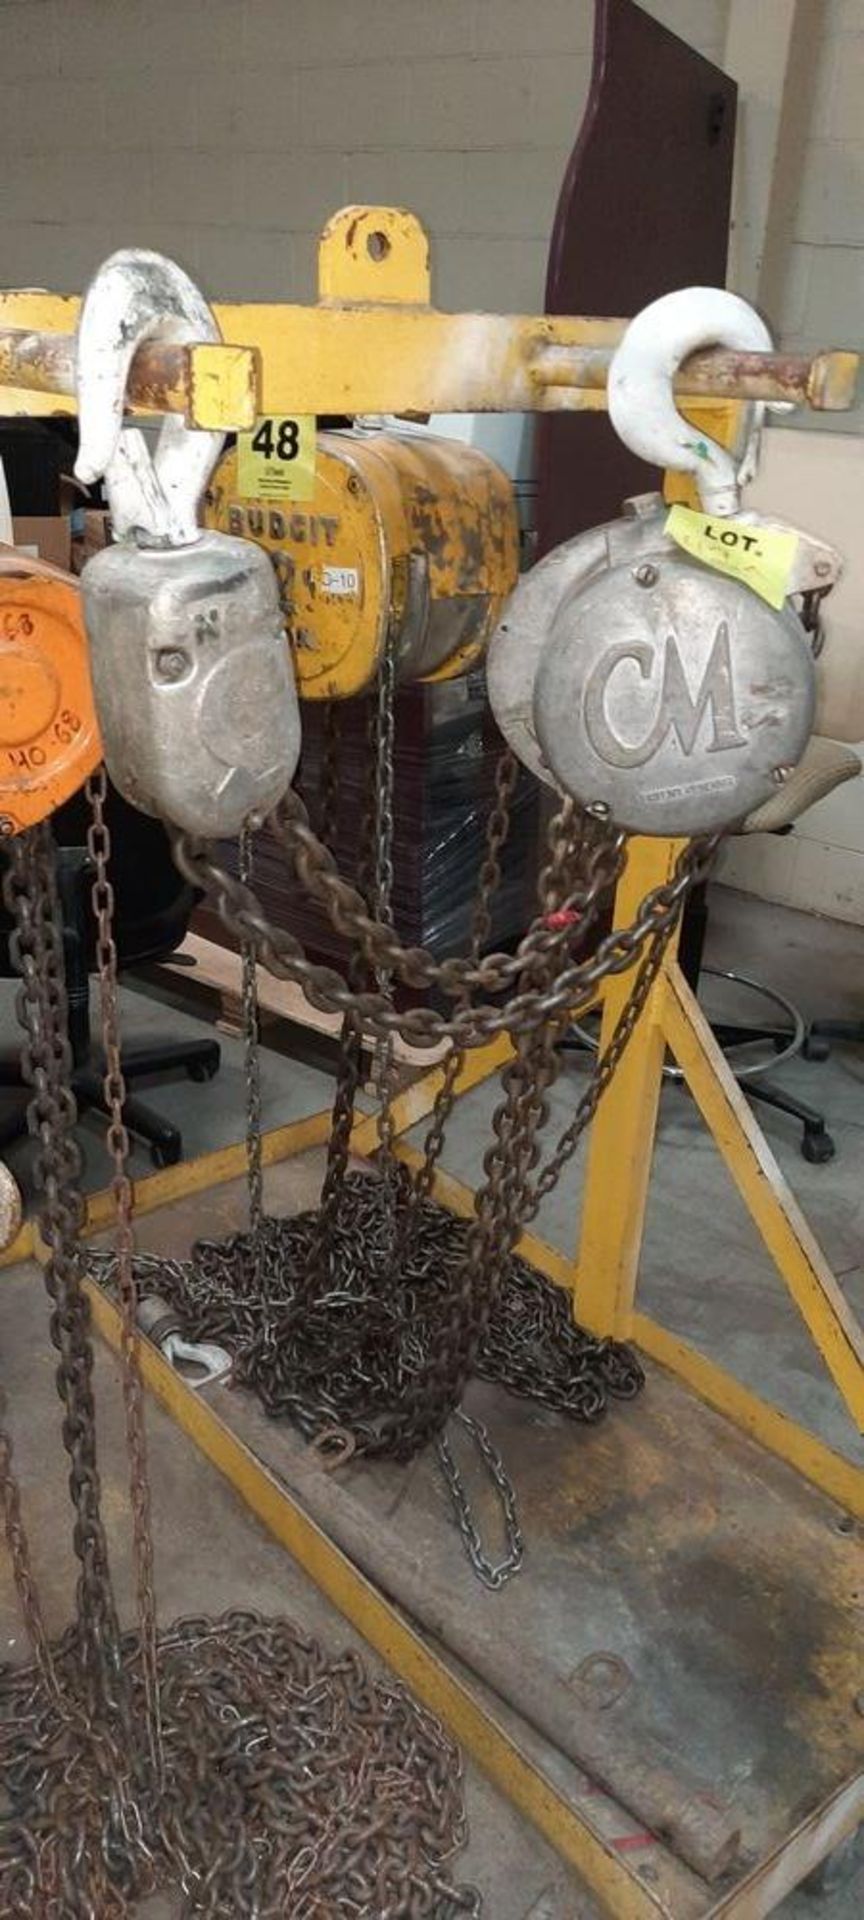 CYCLONE 3-ton Chain Hoist - INSPECTED - Image 2 of 2